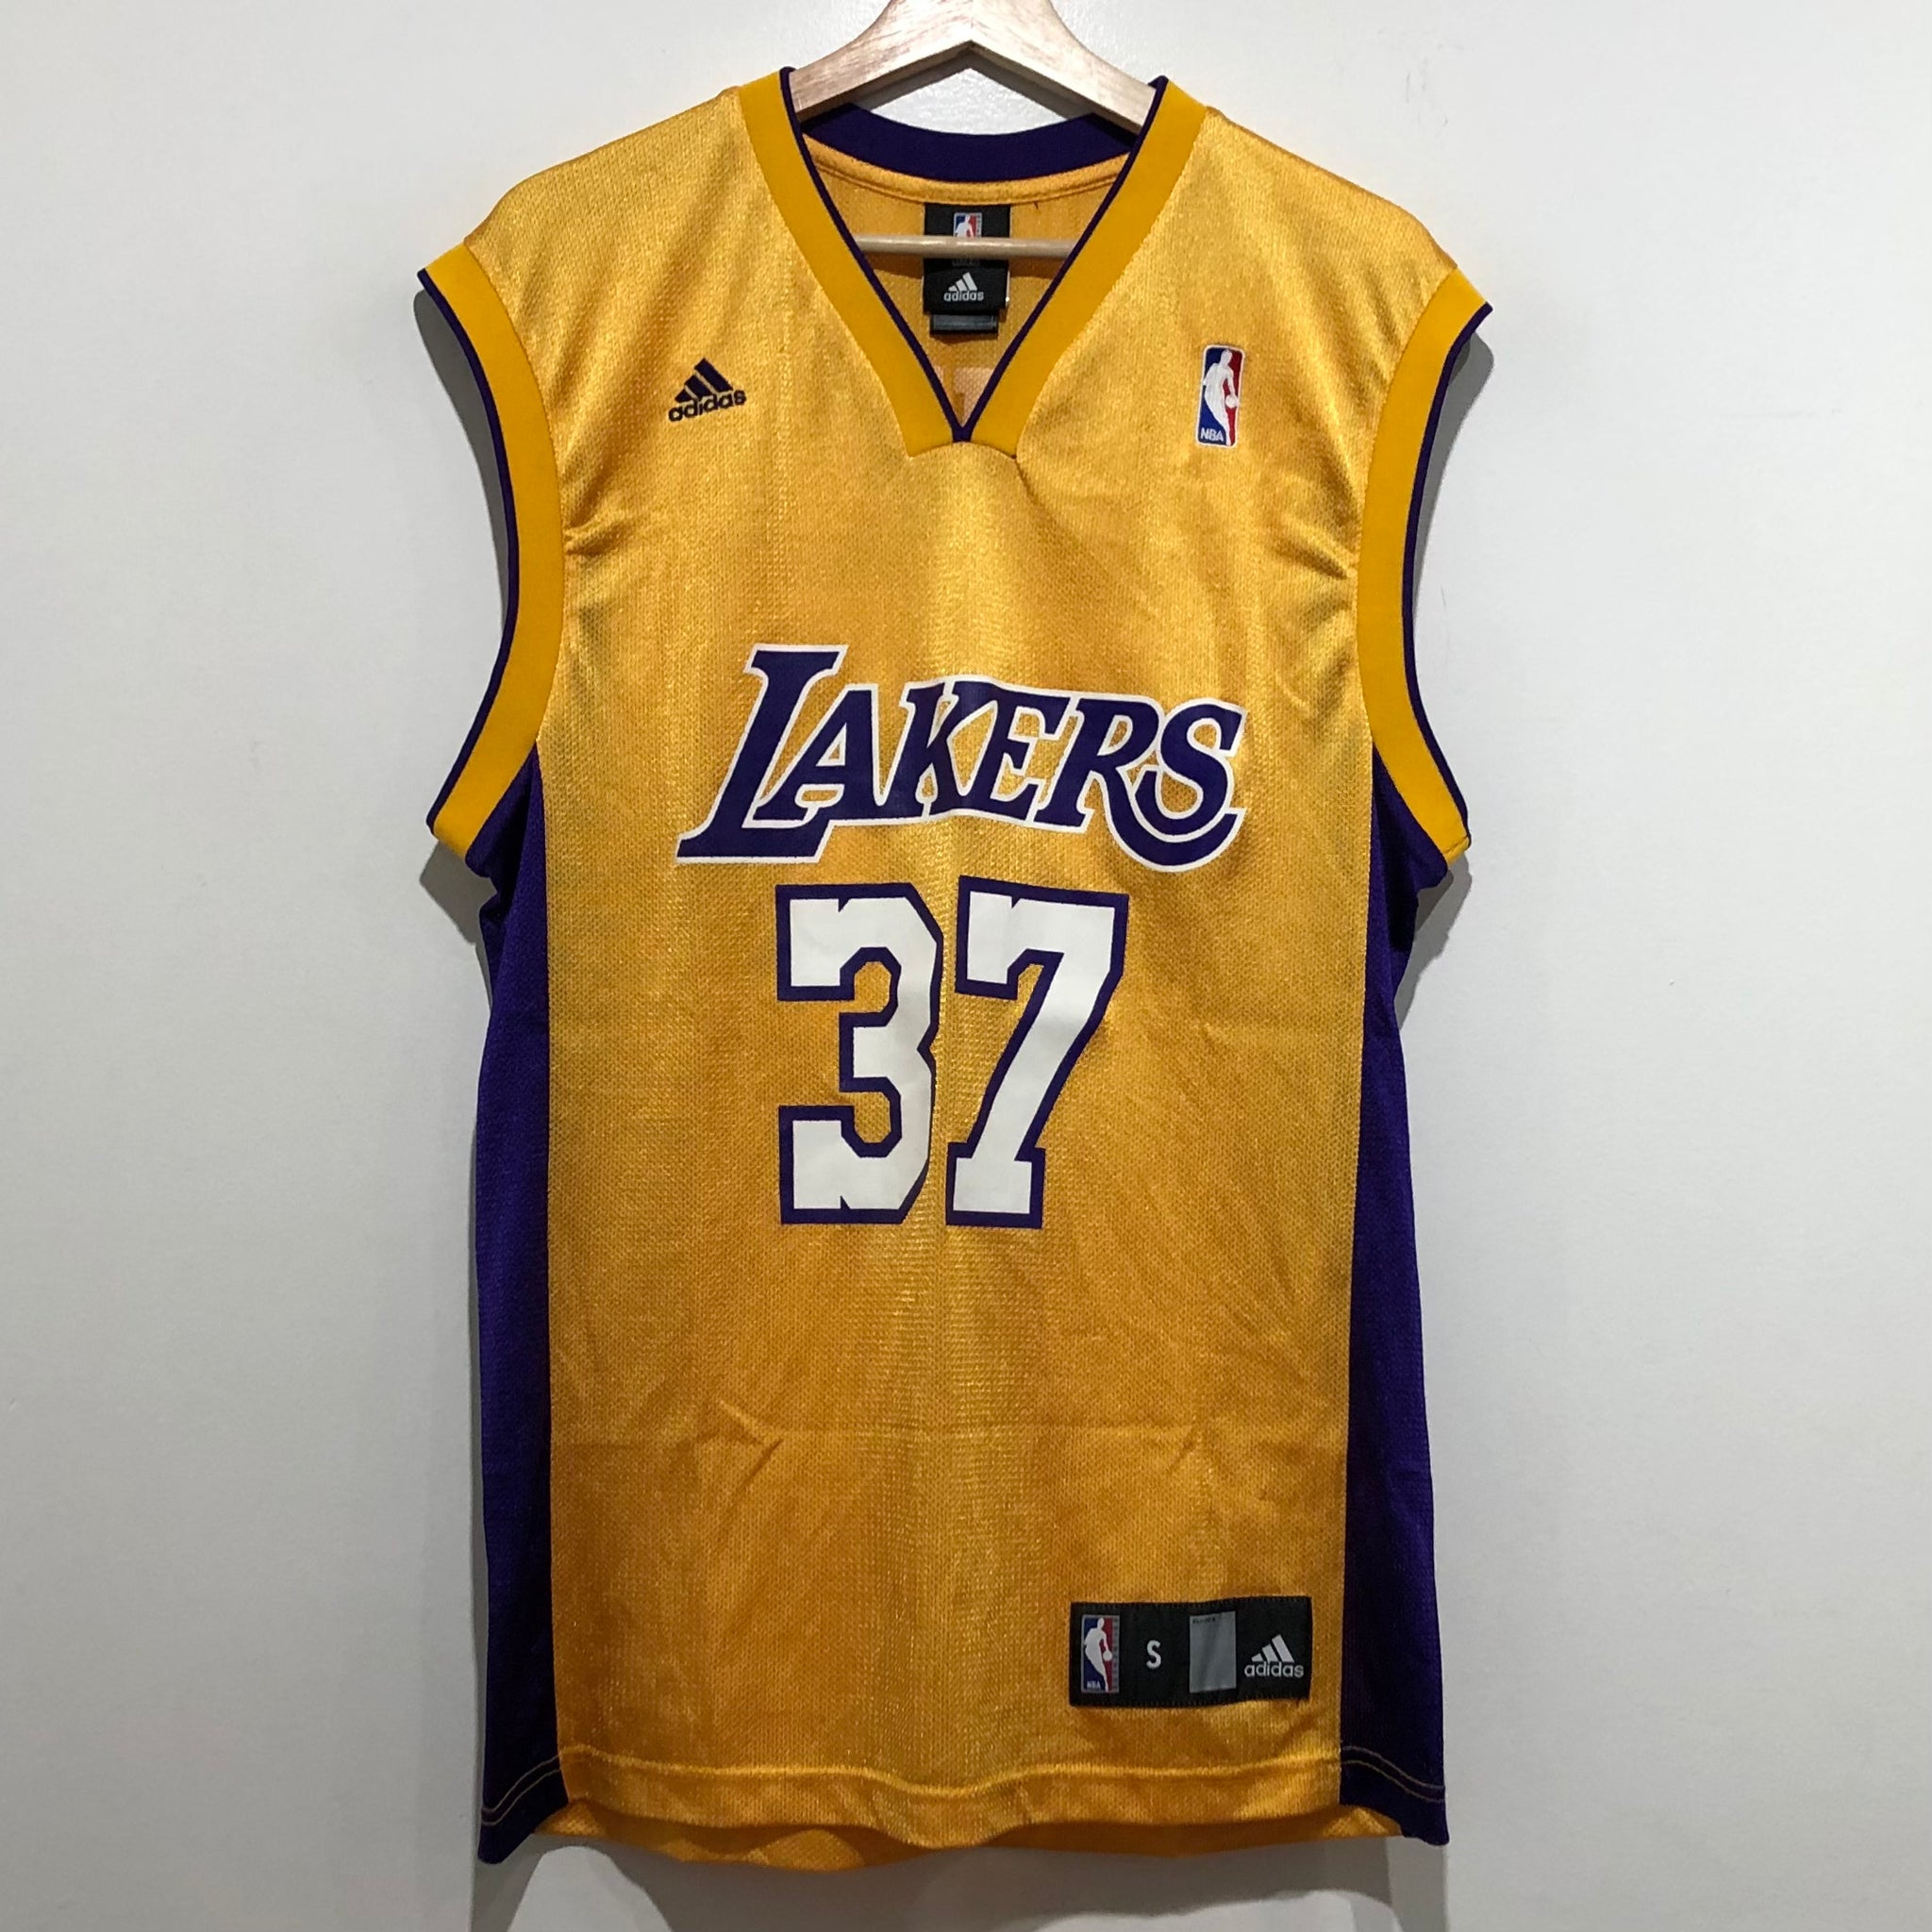 Ron Artest Los Angeles Lakers Jersey S